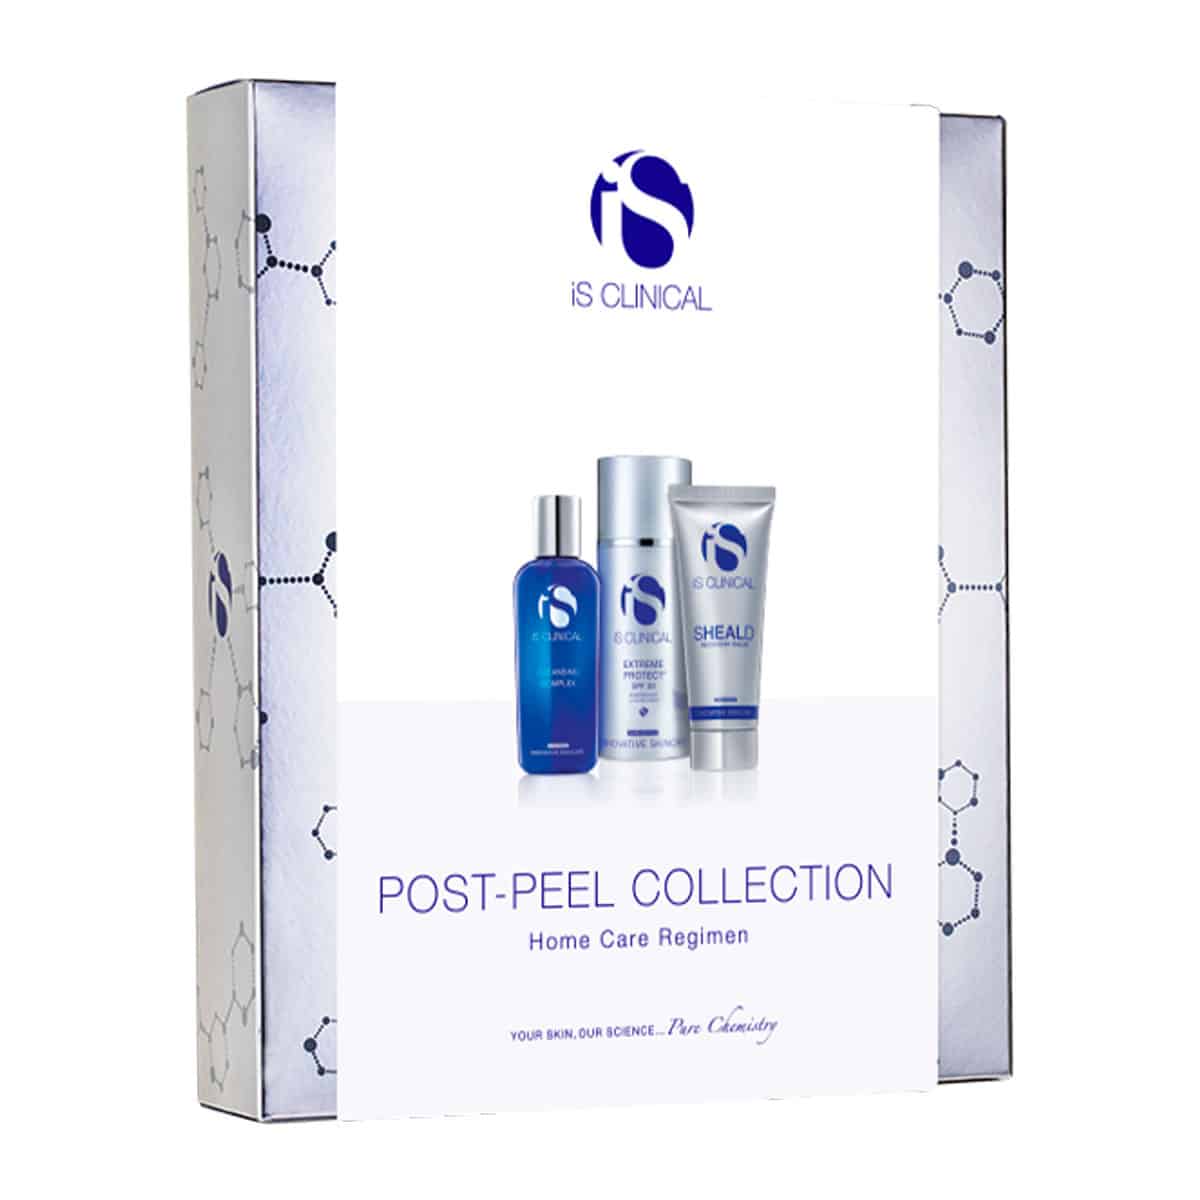 iS CLINICAL Post Peel Kit